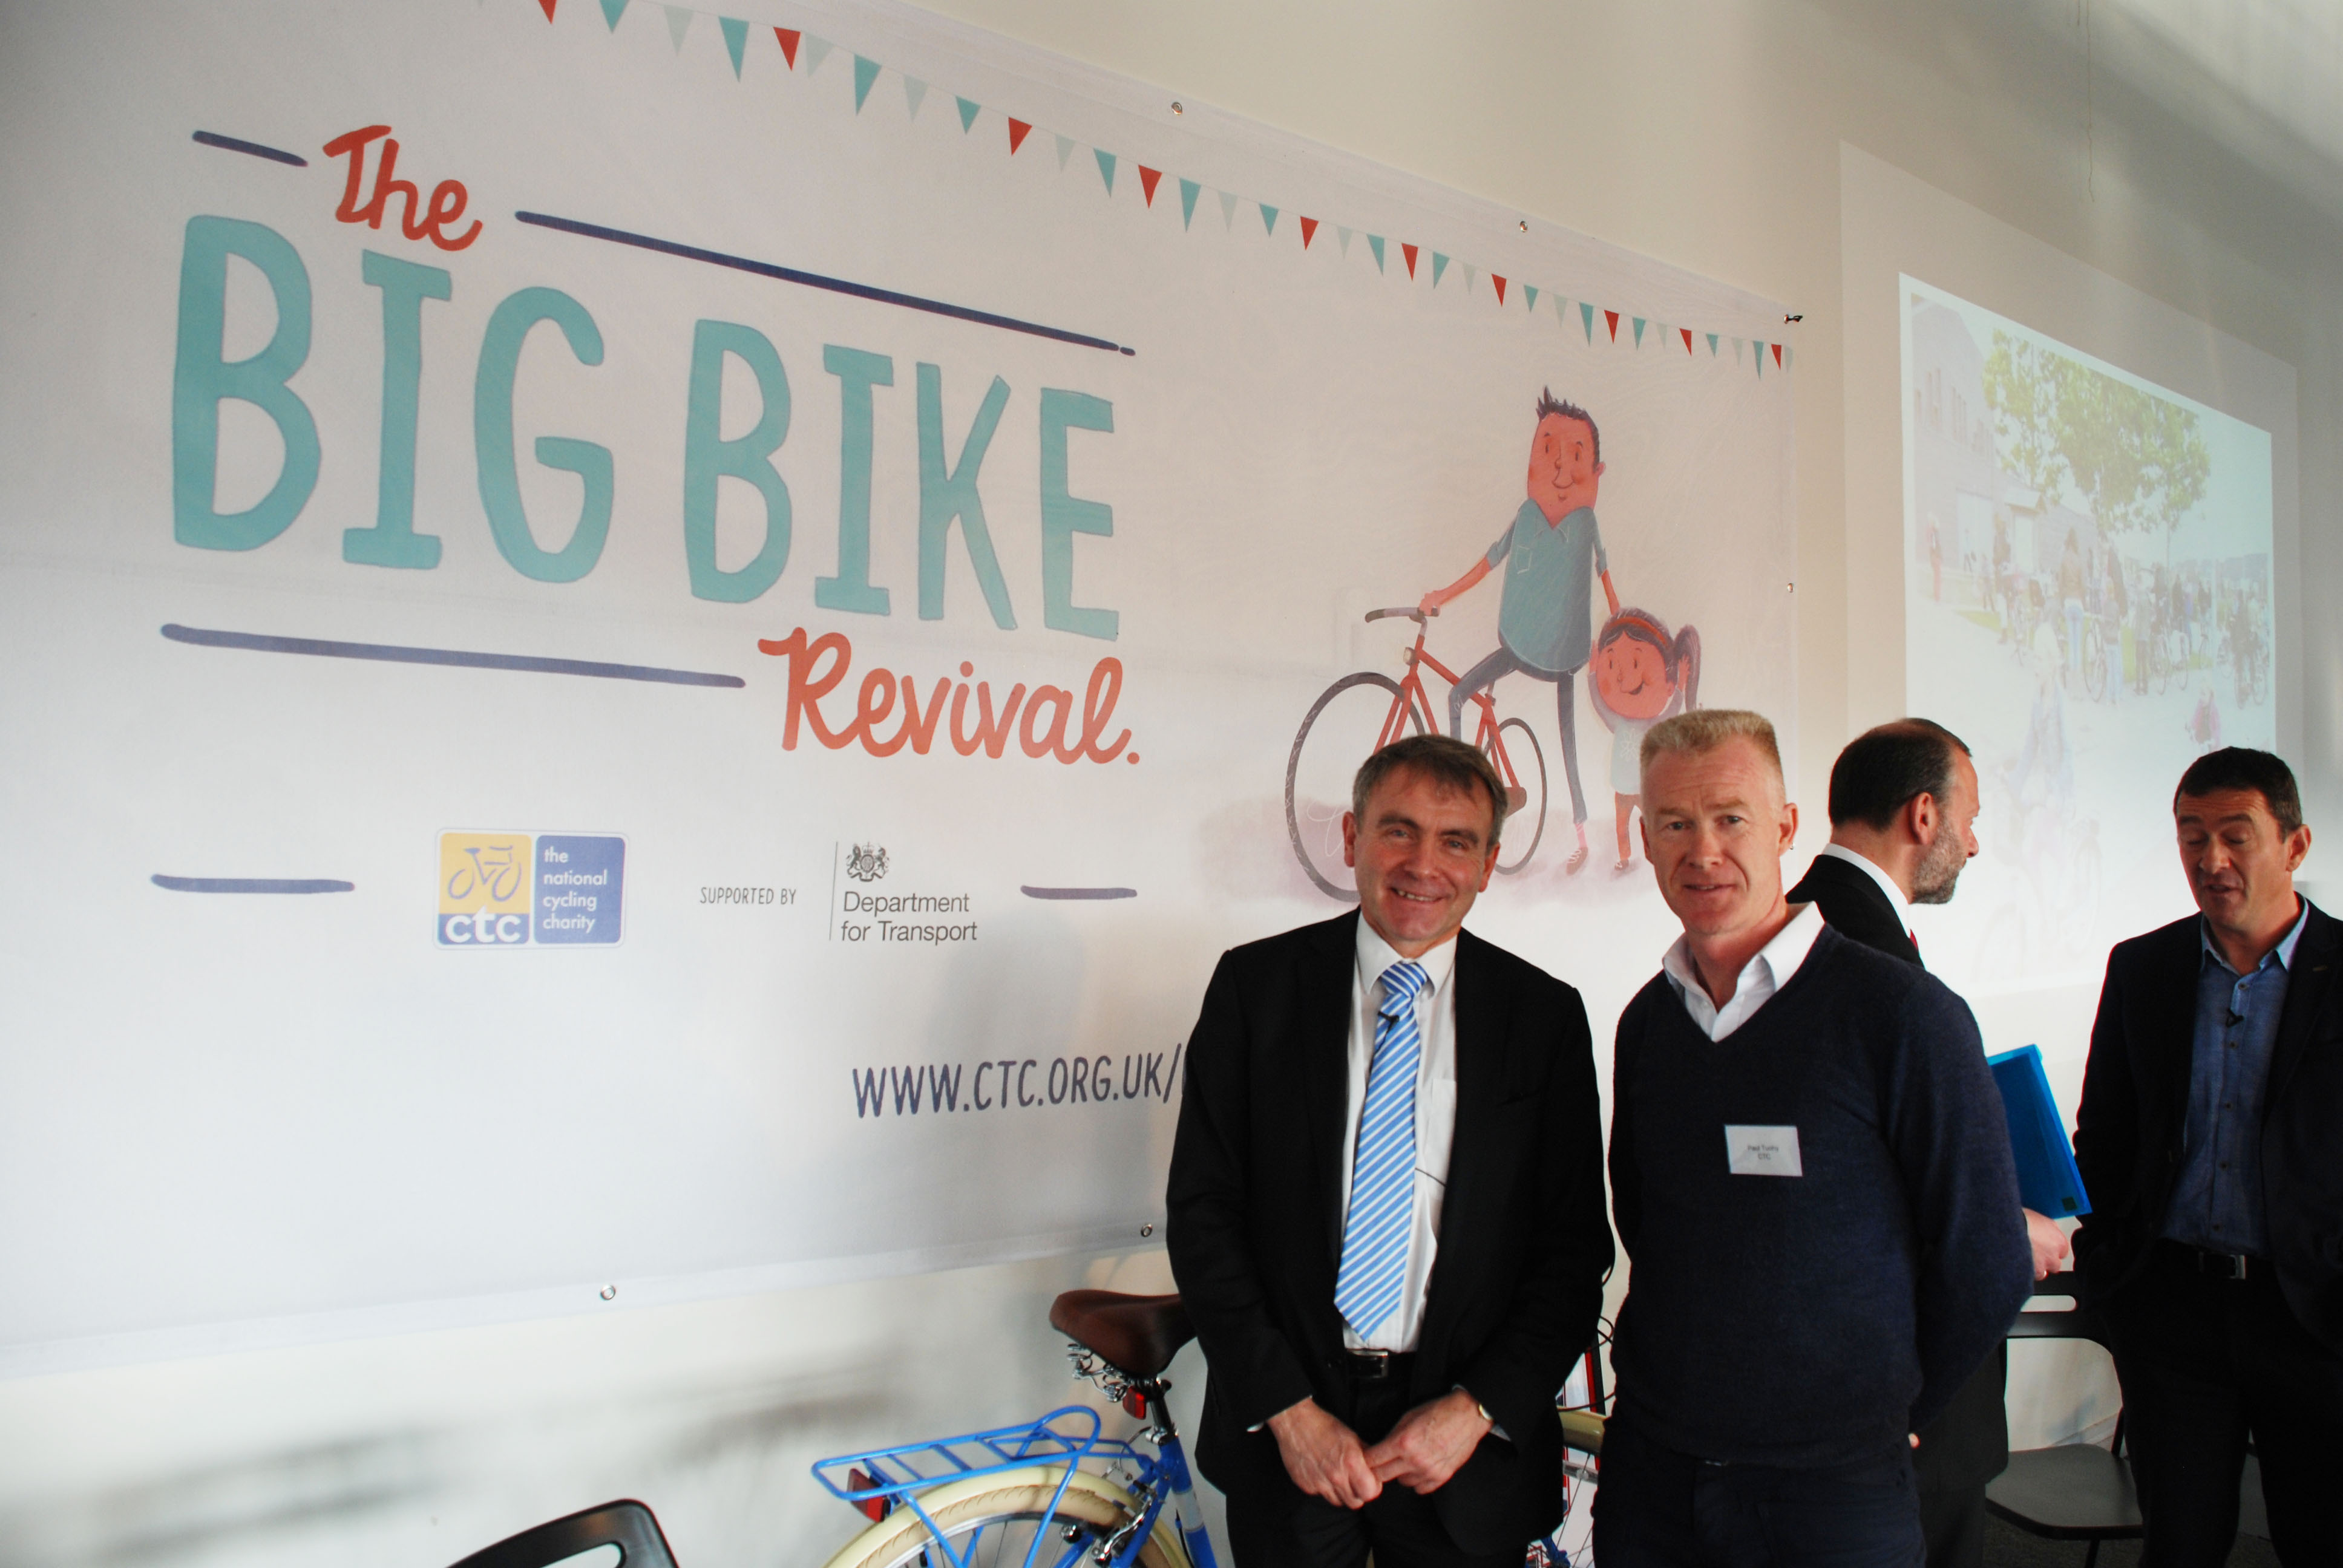 Cycling Minister Robert Goodwill and Paul Tuohy